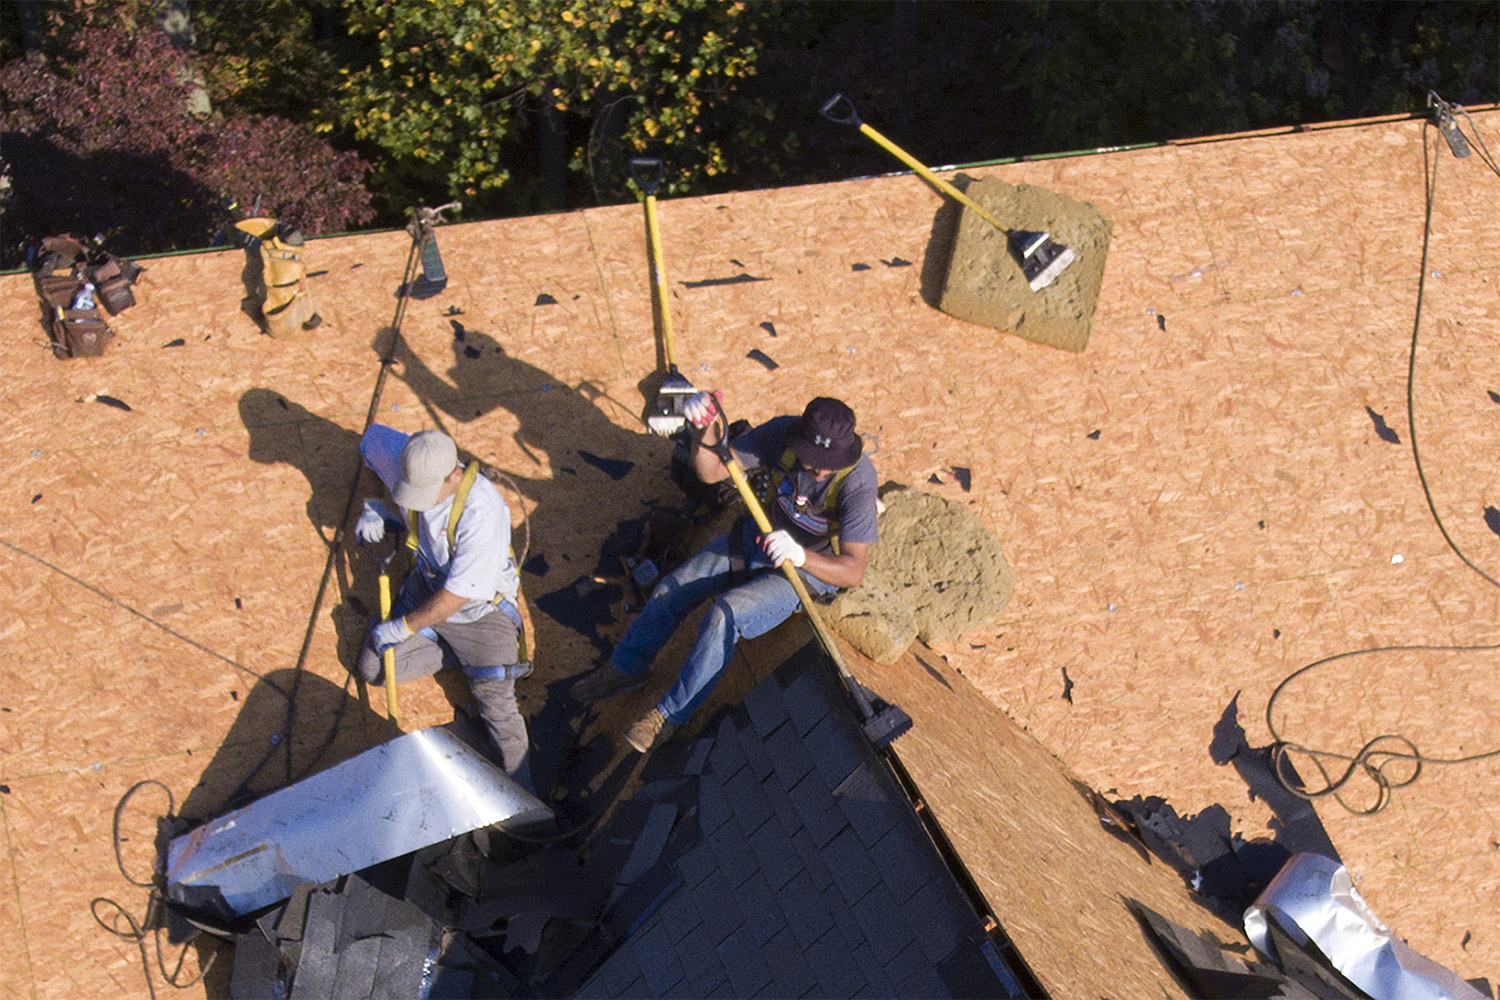 roofers using roof-stripping shovel tool to tear shingles off roof